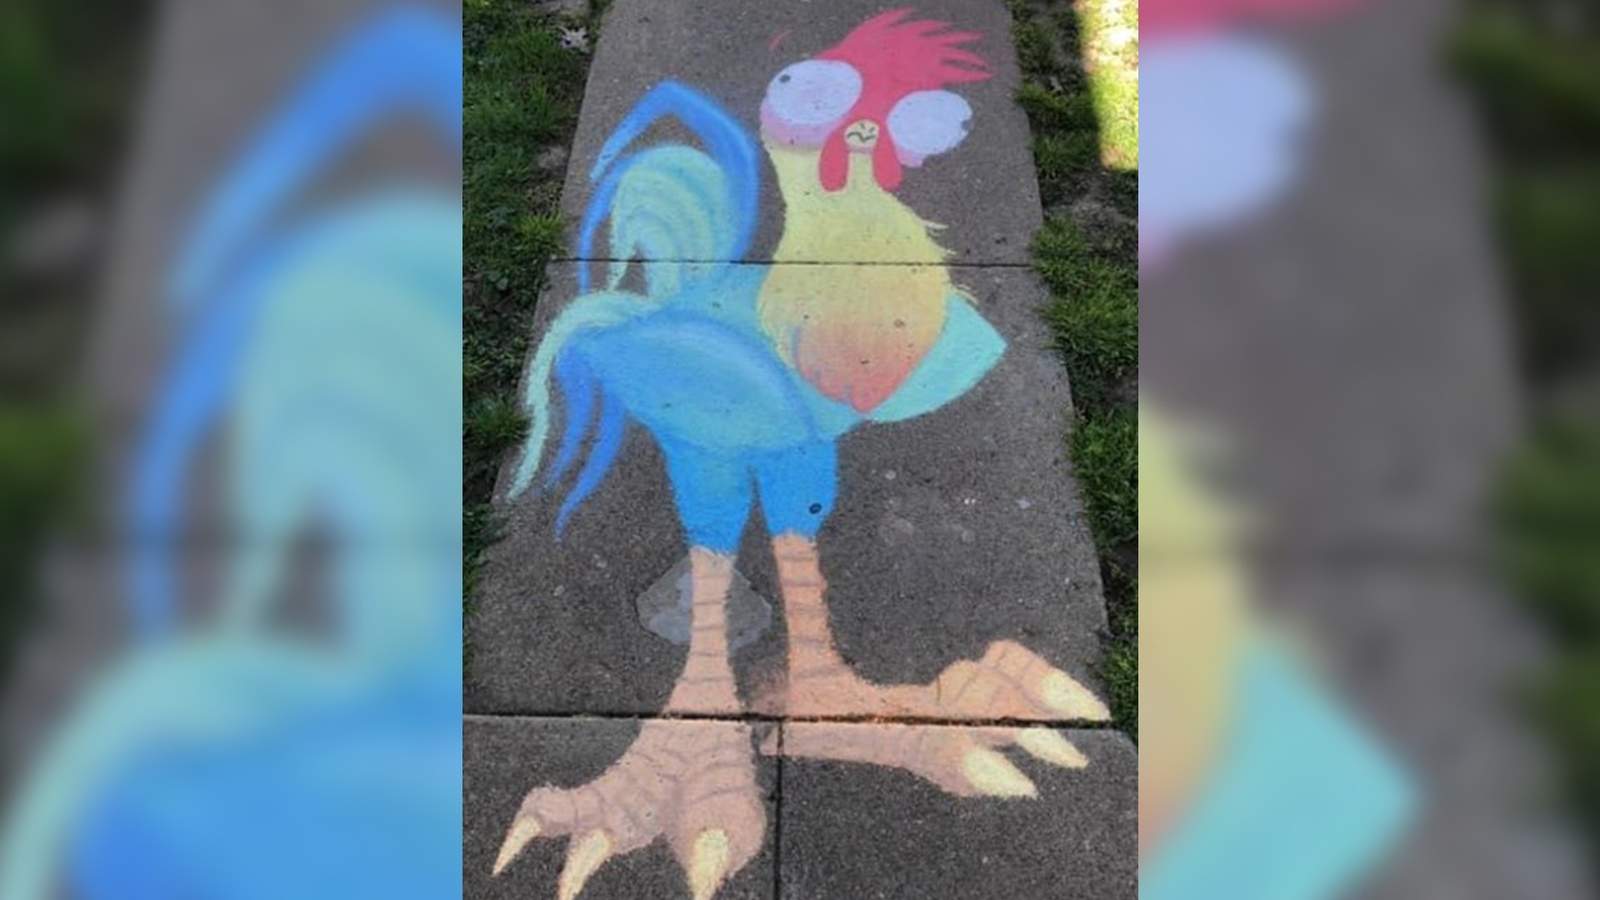 Clifton Forge teen creates colorful sidewalk art during stay-at-home order